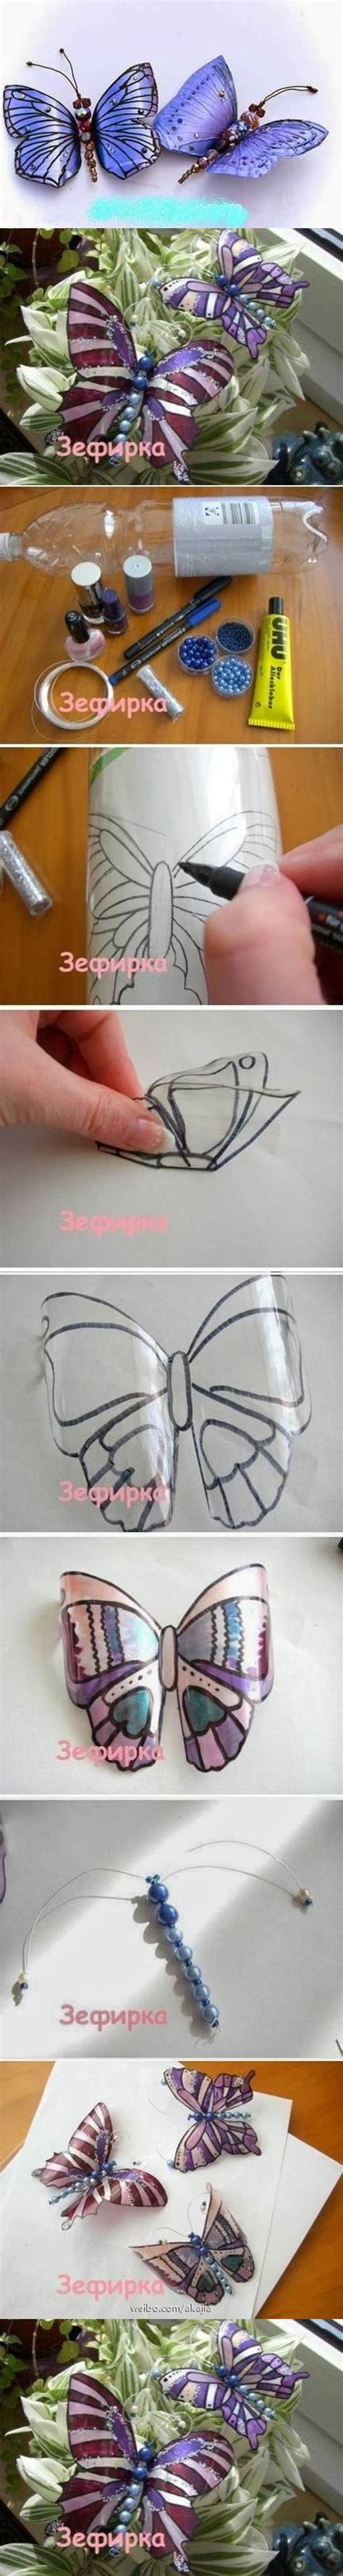 Wonderful Diy Pretty Butterfly From Recycled Bottle